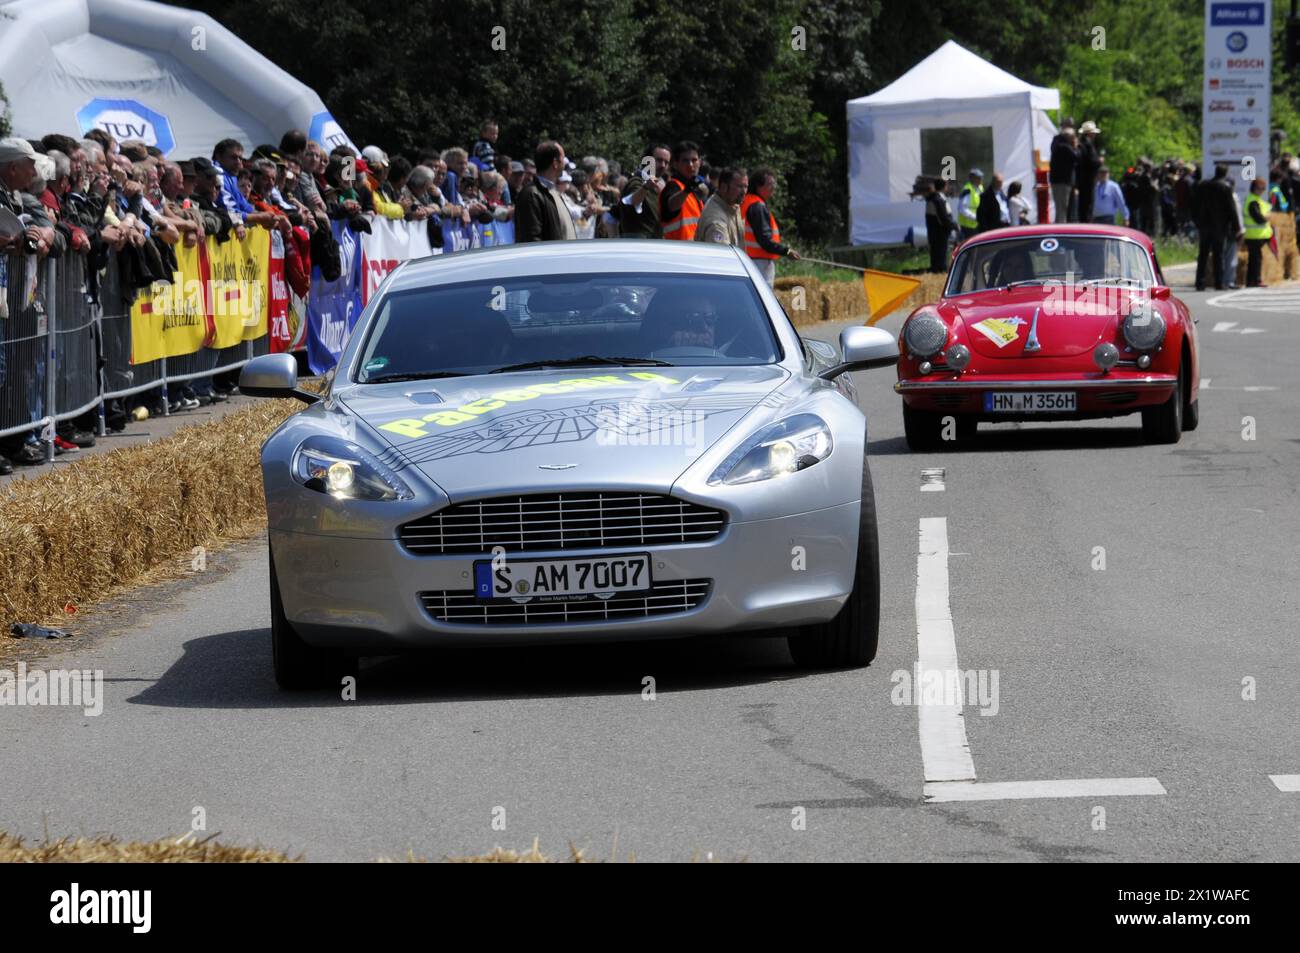 Silver Aston Martin leads a red Alfa Romeo in a classic car race, SOLITUDE REVIVAL 2011, Stuttgart, Baden-Wuerttemberg, Germany Stock Photo